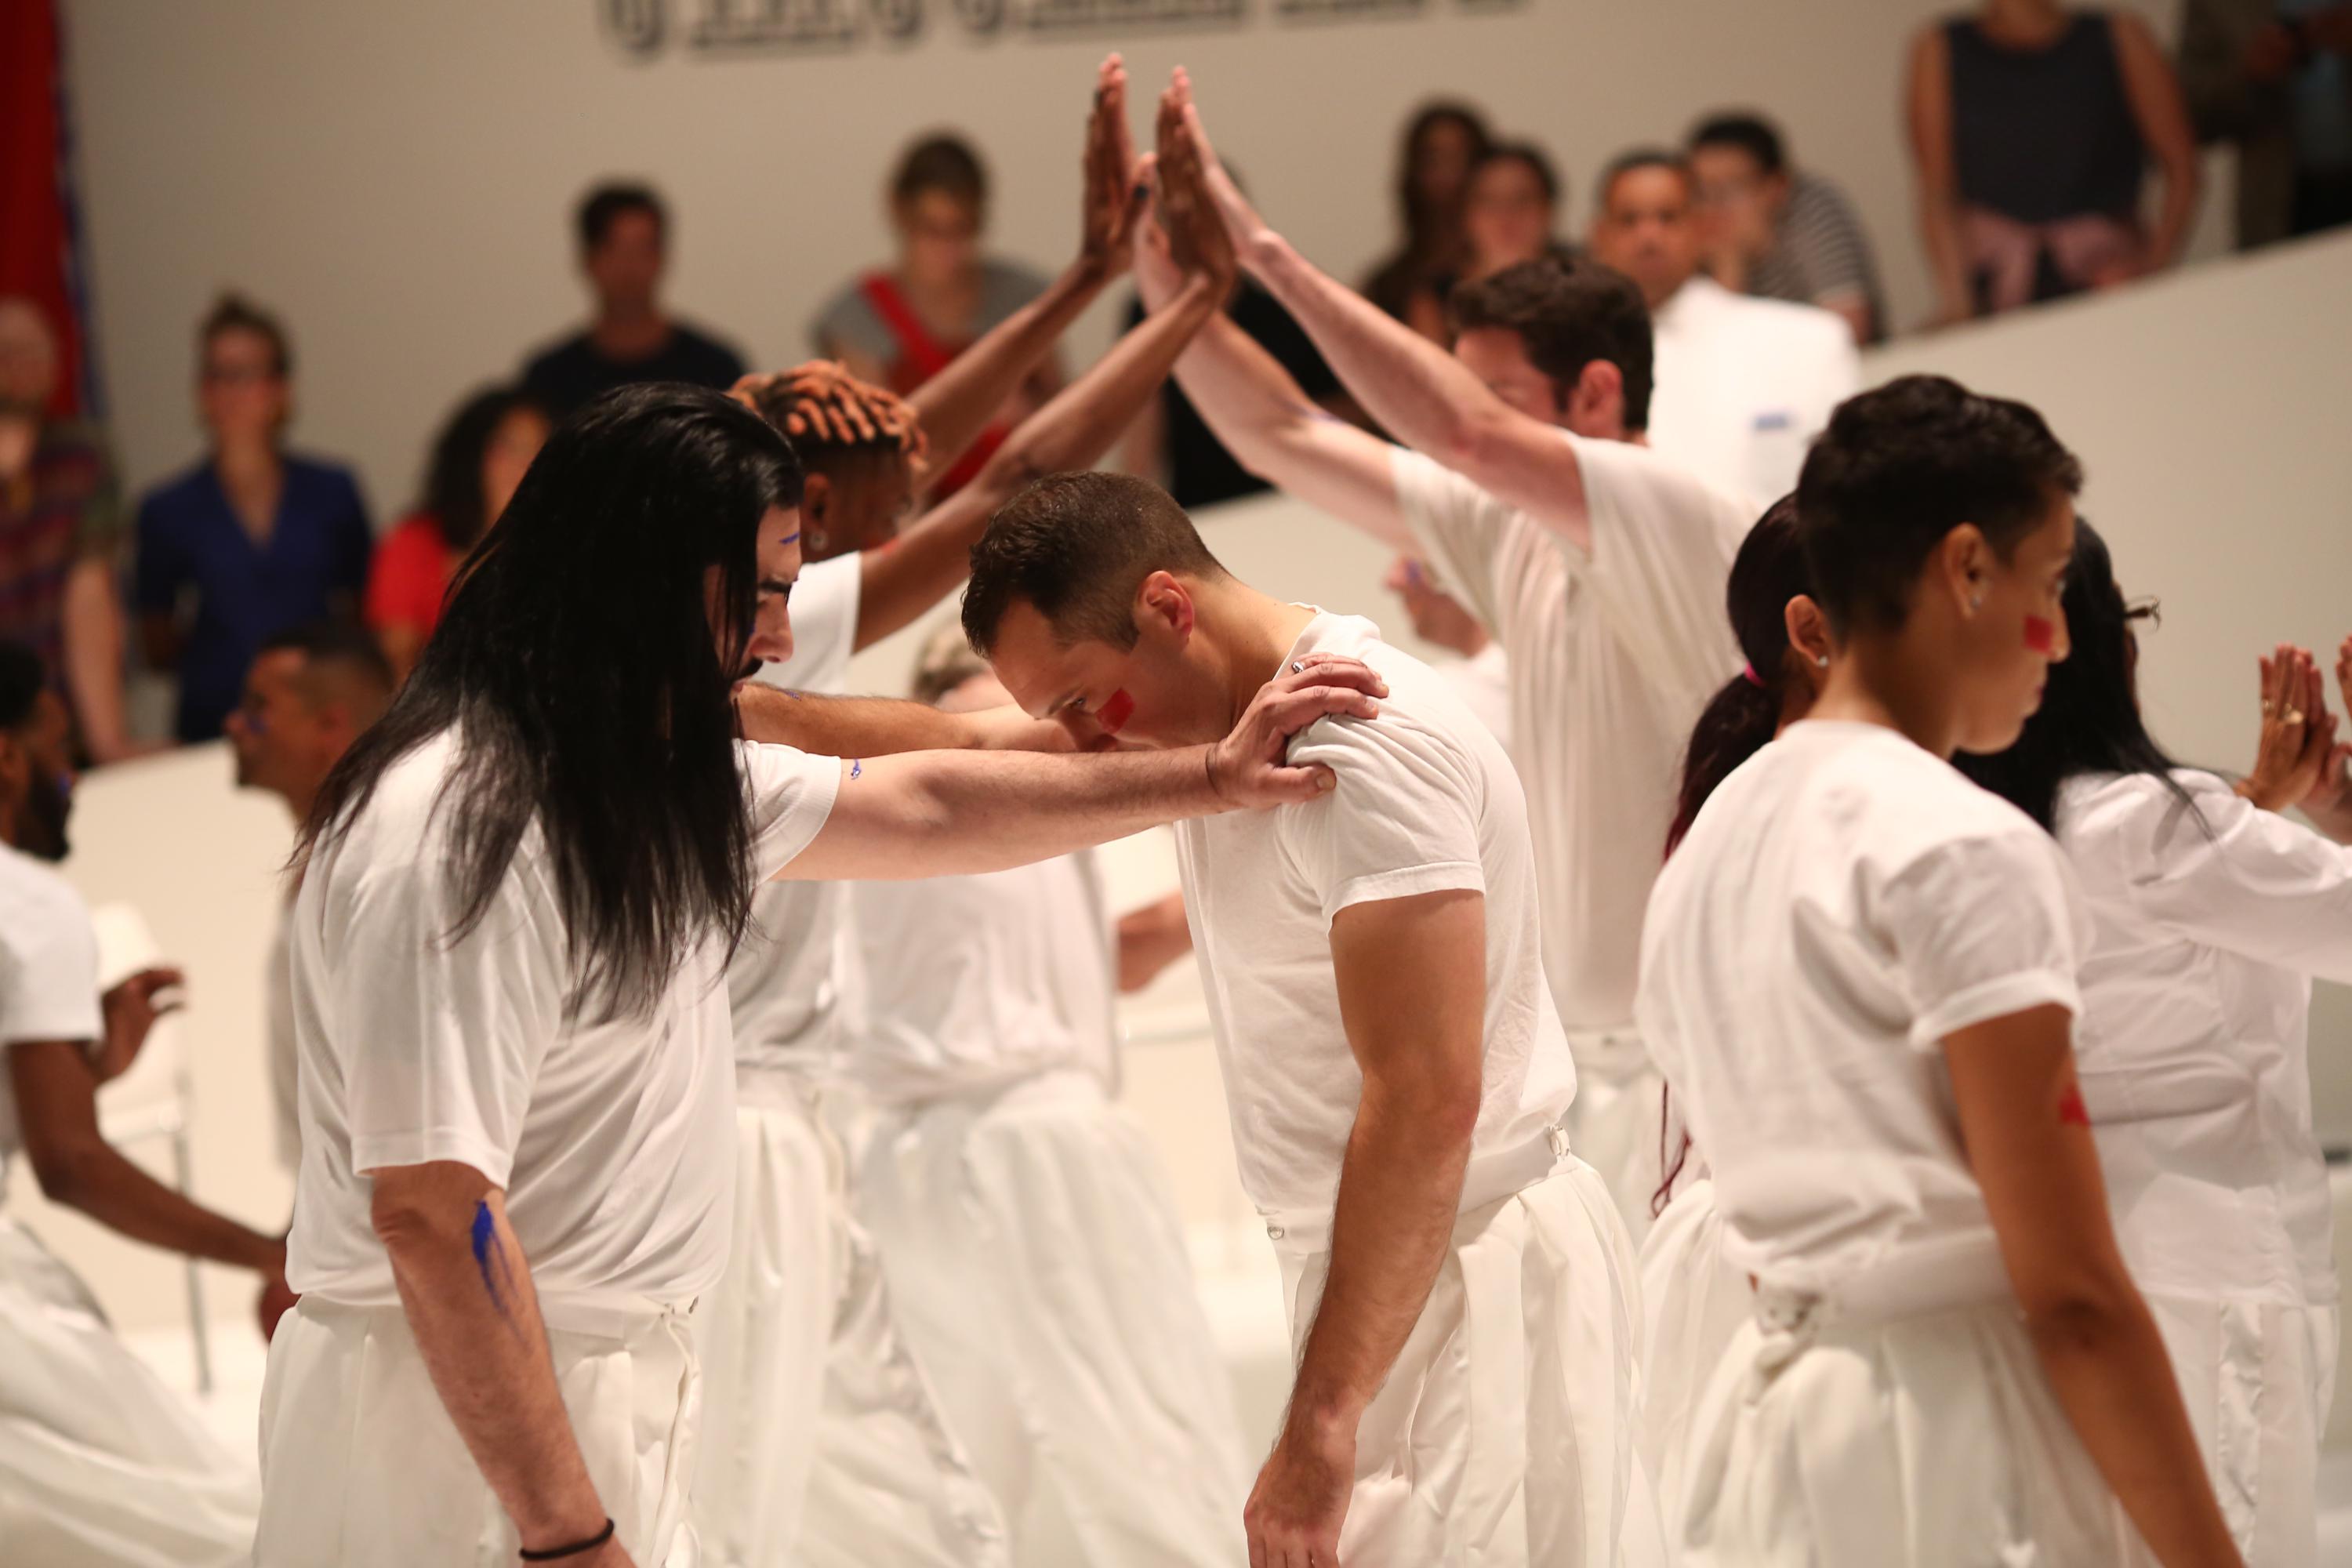 performance still of figures wearing white clothing and joining hands.  The two figures in the foreground rest their hands on each other shoulders